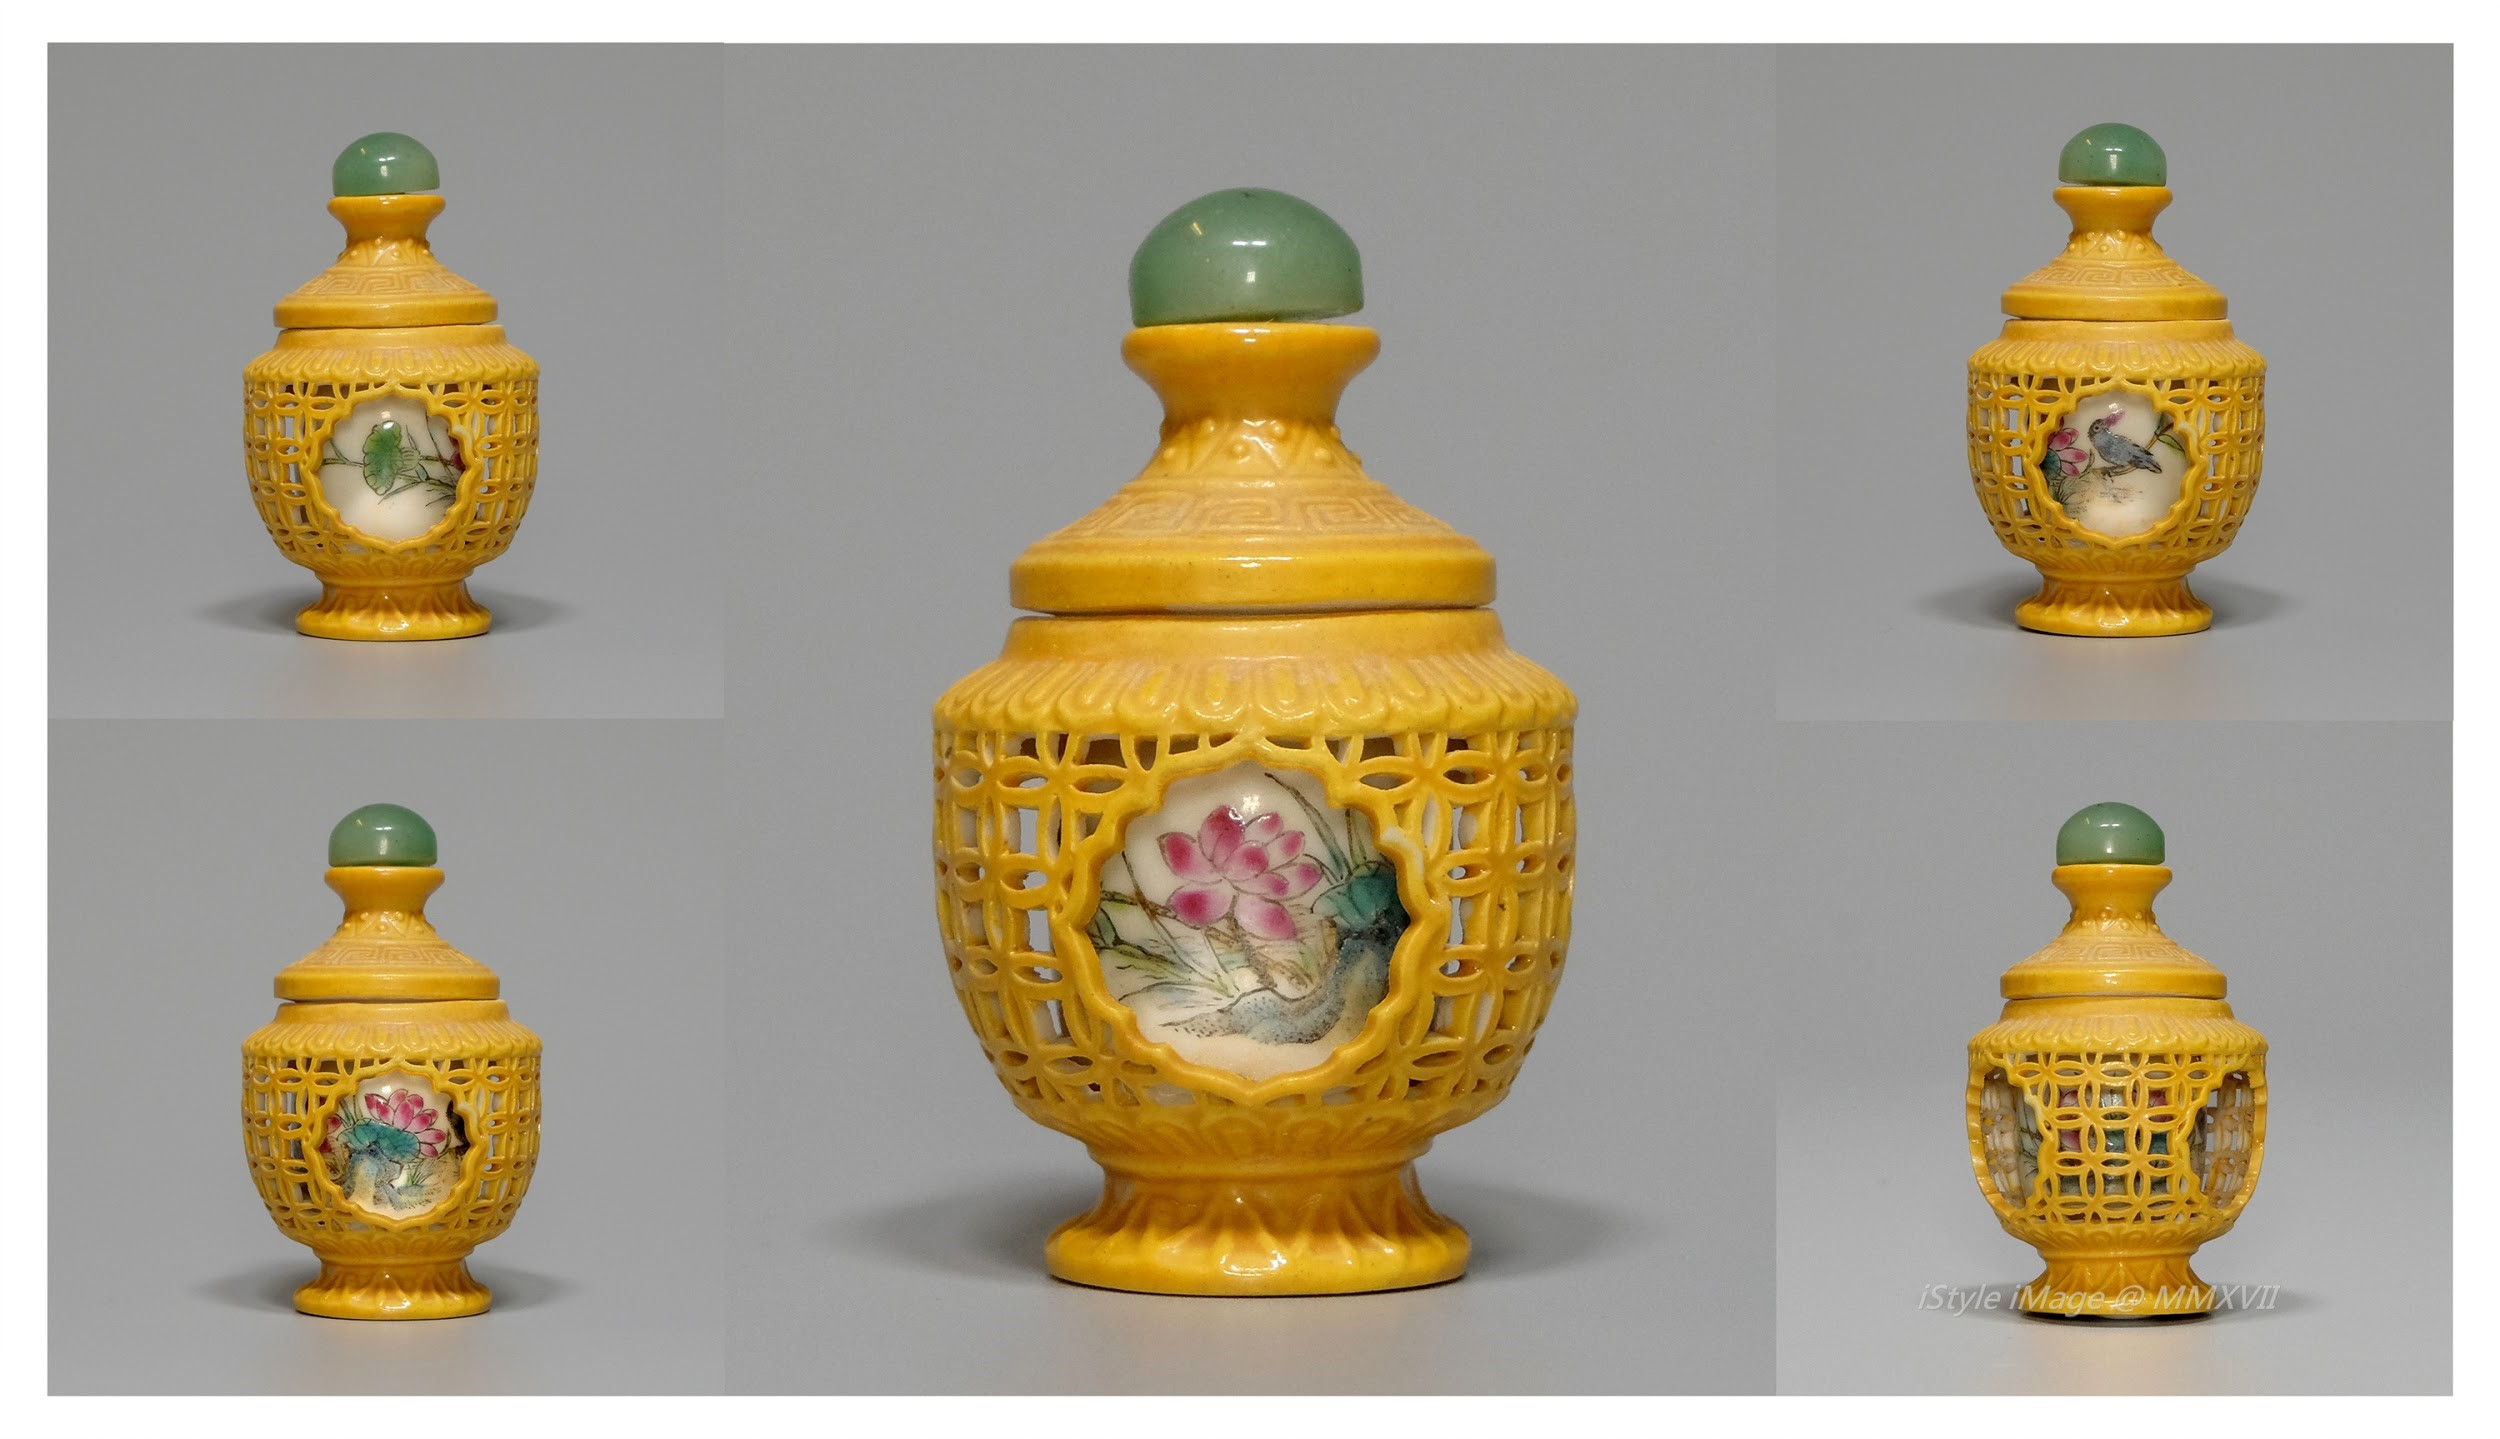 <br><h4>Lot 110 : An rarely exceptional fine and delicate QianLong style famille-rose pierced decoration snuff bottle ( late Qing dynasty to Republic period )</h4>
				  This exceptional fine and rare famille-rose pierced decoration bottle  make alike vase shape, the inner cylinder shaped bottle famille-rose painted with beautiful lotus flower and bird by the blooming flower branch; the outer globular form finely pierced with Chinese 'coin pattern' with fine yellow glaze.  With yellow glass stoppers, and spoon. 
					<br><br>The porcelain art of China reached to the peak era on Qianlong period, according to the complexity, superb technology, material supply and time limitation requirement set by the emperor Qianlong, the successful results from A.D.1743 were unprecedented.
The royal porcelain make under the innovation and supervision by the Royal Porcelain Bureau Governor Tang Ying, each of these product were carrying royalty, fascinating, impressively beautiful, elegant, and unique character. Every creation were unprecedented.
All of these collection were highly treasure in Imperial Court in Qing Dynasty, as considering the most important category. With very scarce production, every product were only make one pair generally, and no more than a few pairs. The vast majority of these collection were keeping in the Qingqing Palace, a small number of the others were keeping in Yuanmingyuan (Imperial Summer Court).
Nowadays, we can find the relics in Taipei Palace Museum, and in the Beijing Palace Museum, also the Nanjing Museum. Those others  spread in outside of China are looted by the invaders after the Yuanmingyuan (Imperial Summer Court) fall out in 'Opium War' on A.D.1860, or the imitation.
					<br>Measurements (H) high 5.5 CM,  (W)width 3.5CM<br><br><br>特別高雅和罕見精巧的乾隆風格粉彩 '玲瓏套瓶' 煙壺  ( 晚清至民國時期 )<br>這特別而高雅，罕見又精巧的粉彩 '玲瓏套瓶' 裝飾成相似花瓶形狀，內圓筒形瓶子以粉彩釉上美麗的蓮花和喜鵲站在花朵綻放的花枝; 外部球形體細膩的用 '玲瓏' 刺穿方法用黃釉料做中國 '古錢' 圖案。 配綠色玻璃塞子和勺子。<br>尺寸(H)高 5.5 厘米, (W)濶 3.5 厘米